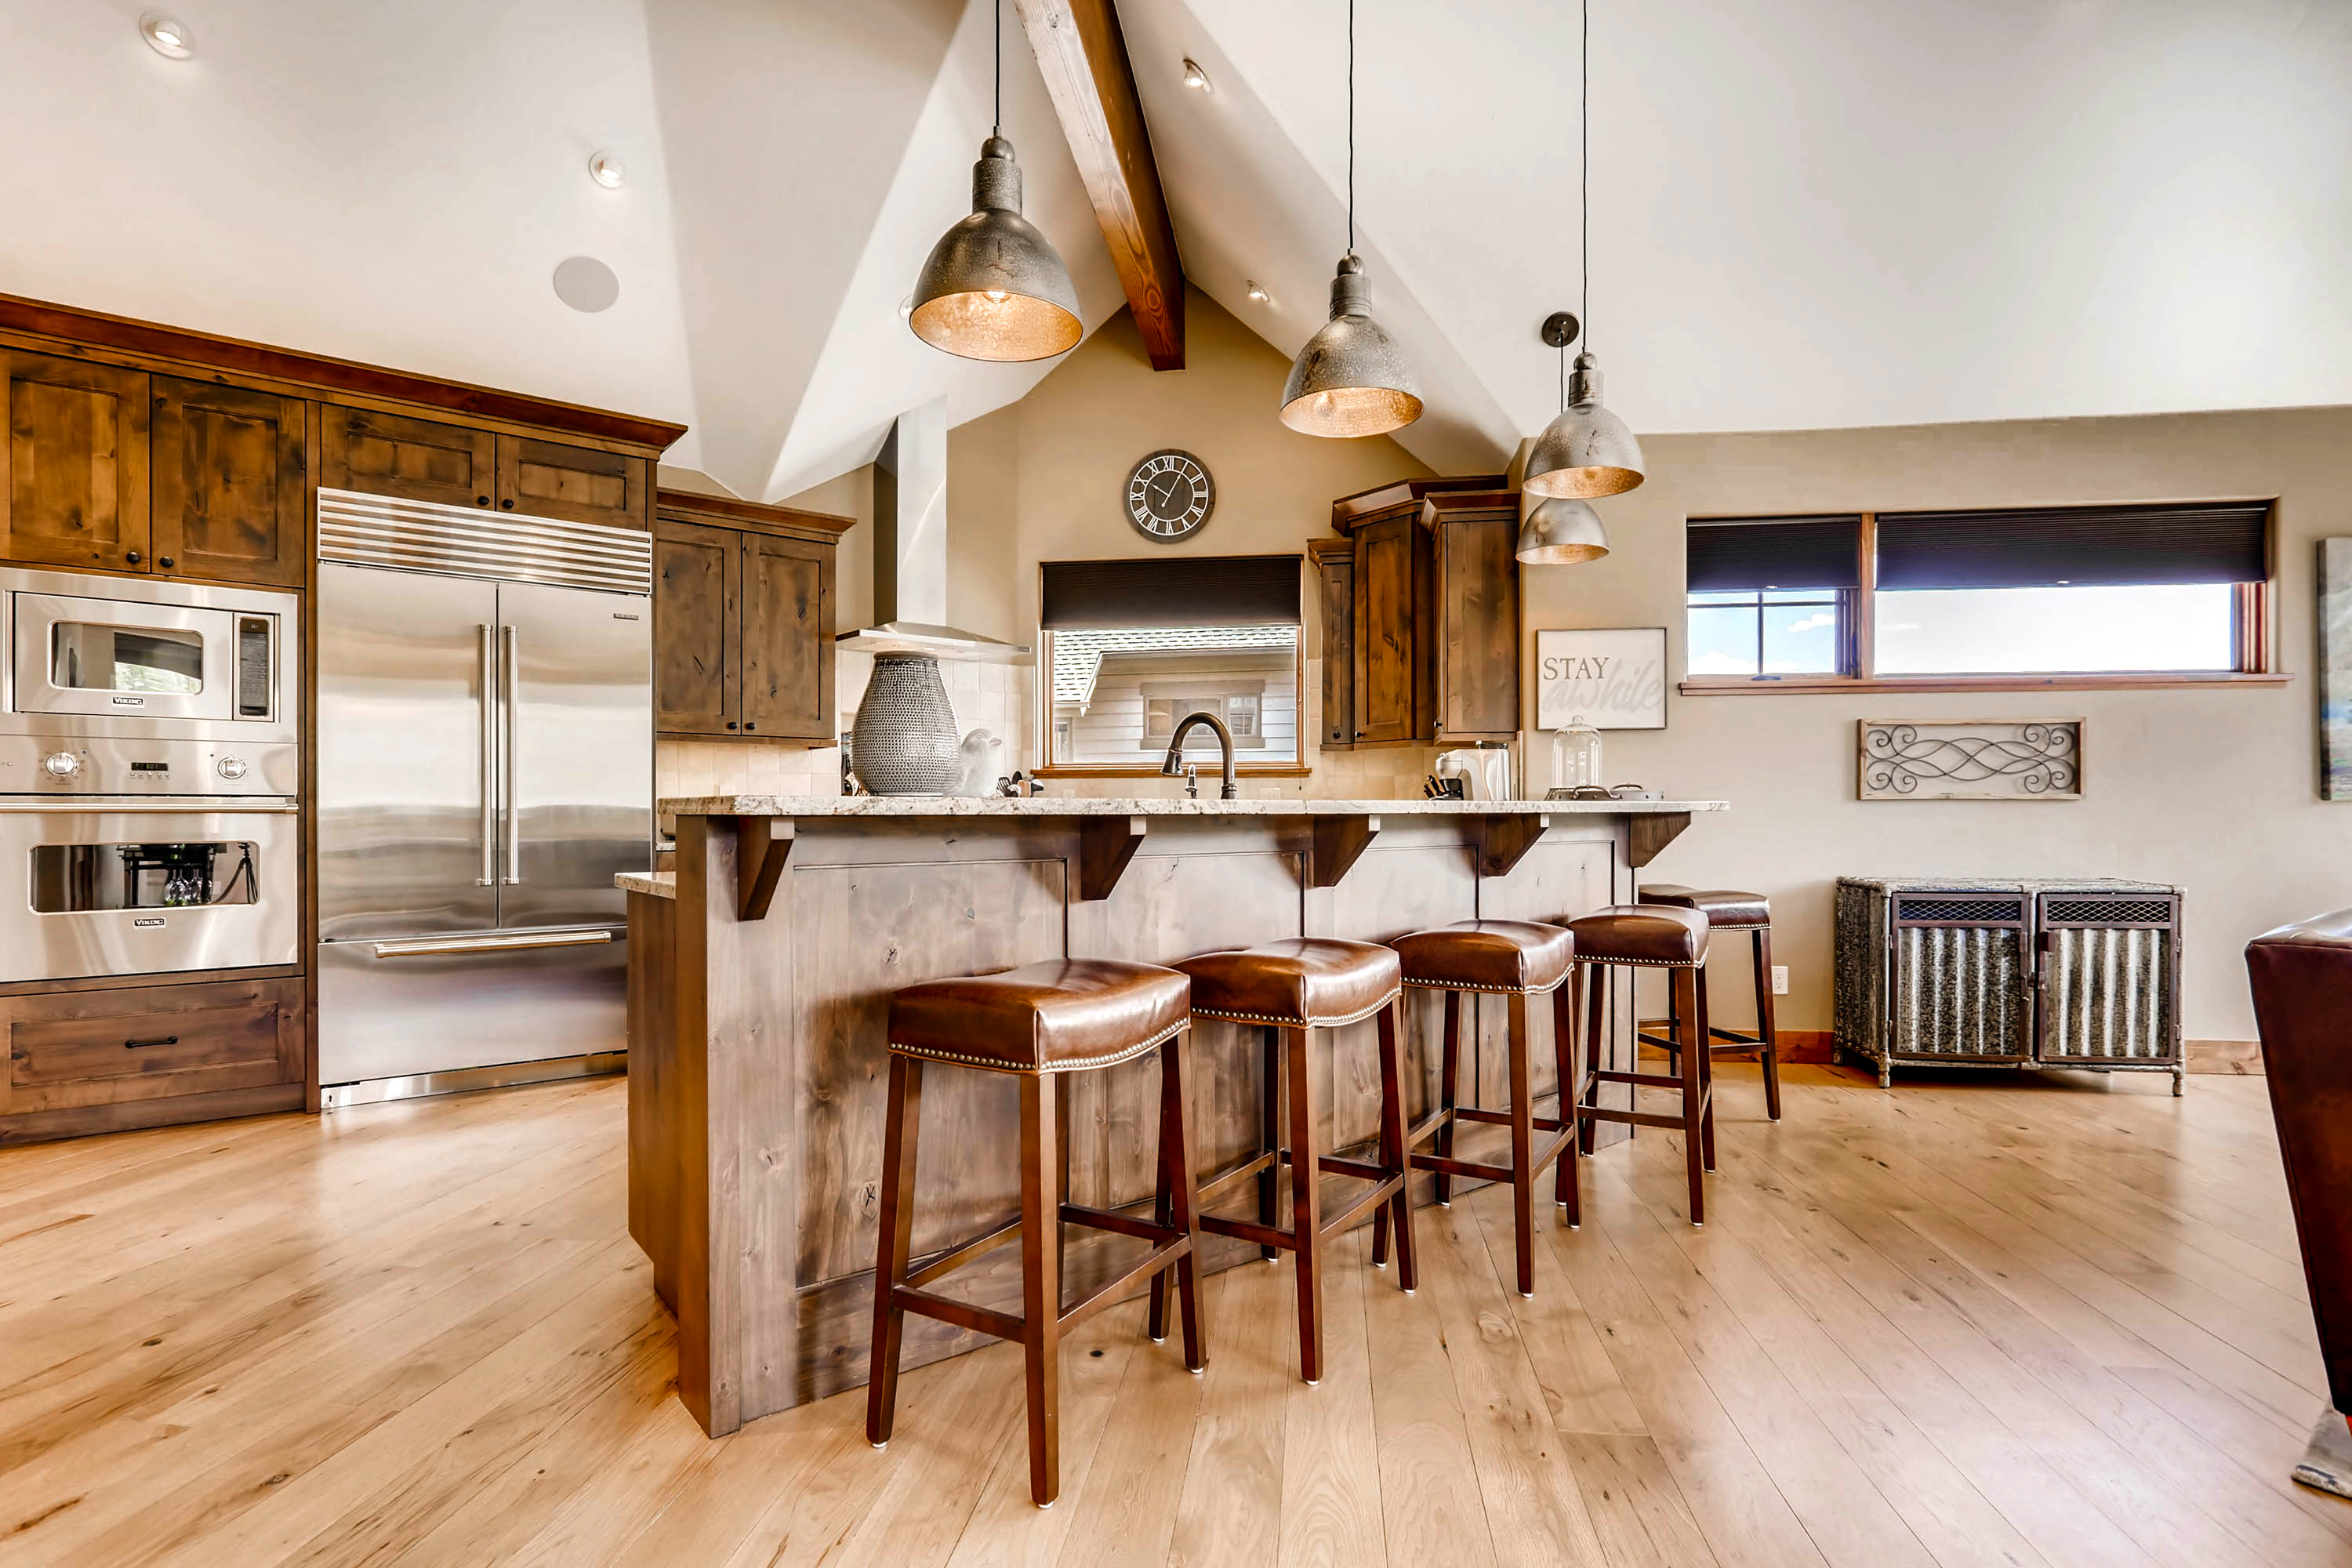 Rustic charm in this fully stocked kitchen